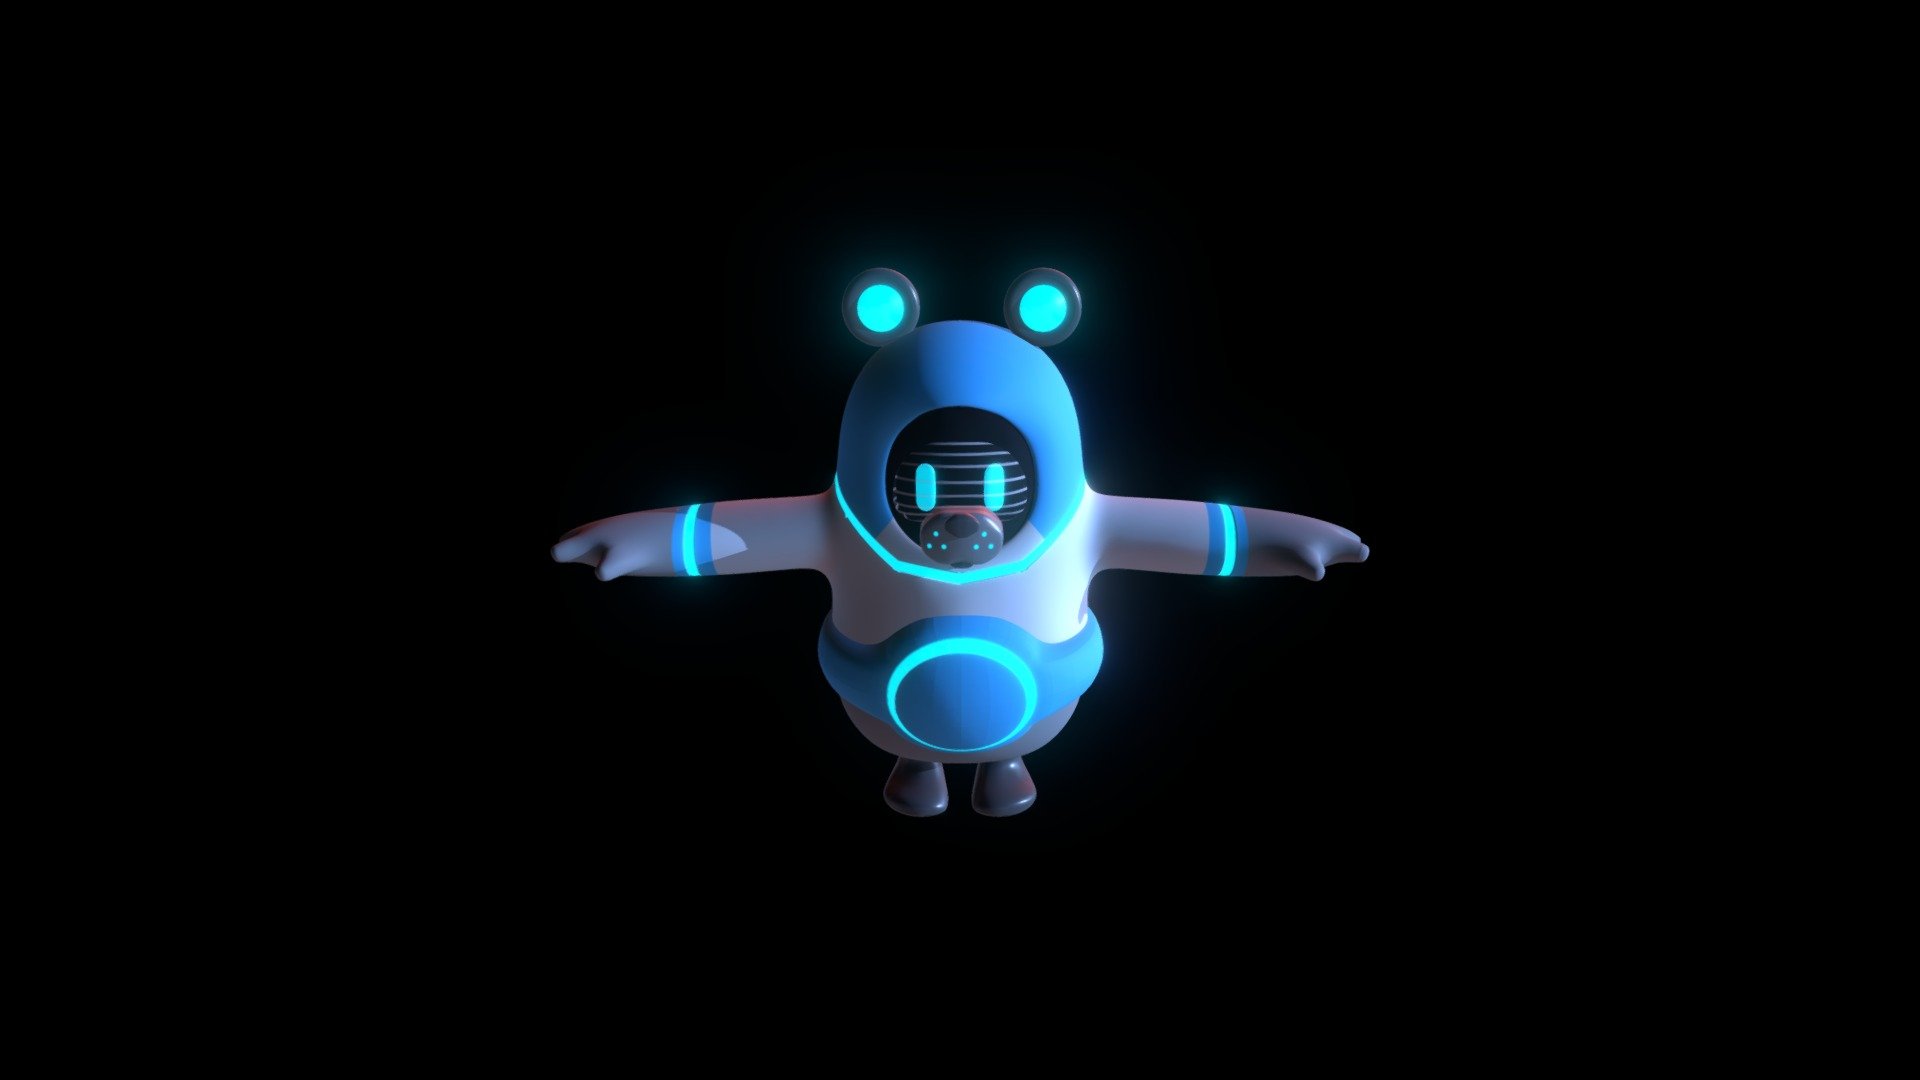 A Robot Polar Bear suit for FallGuys.

This is a fan-made concept 3d model